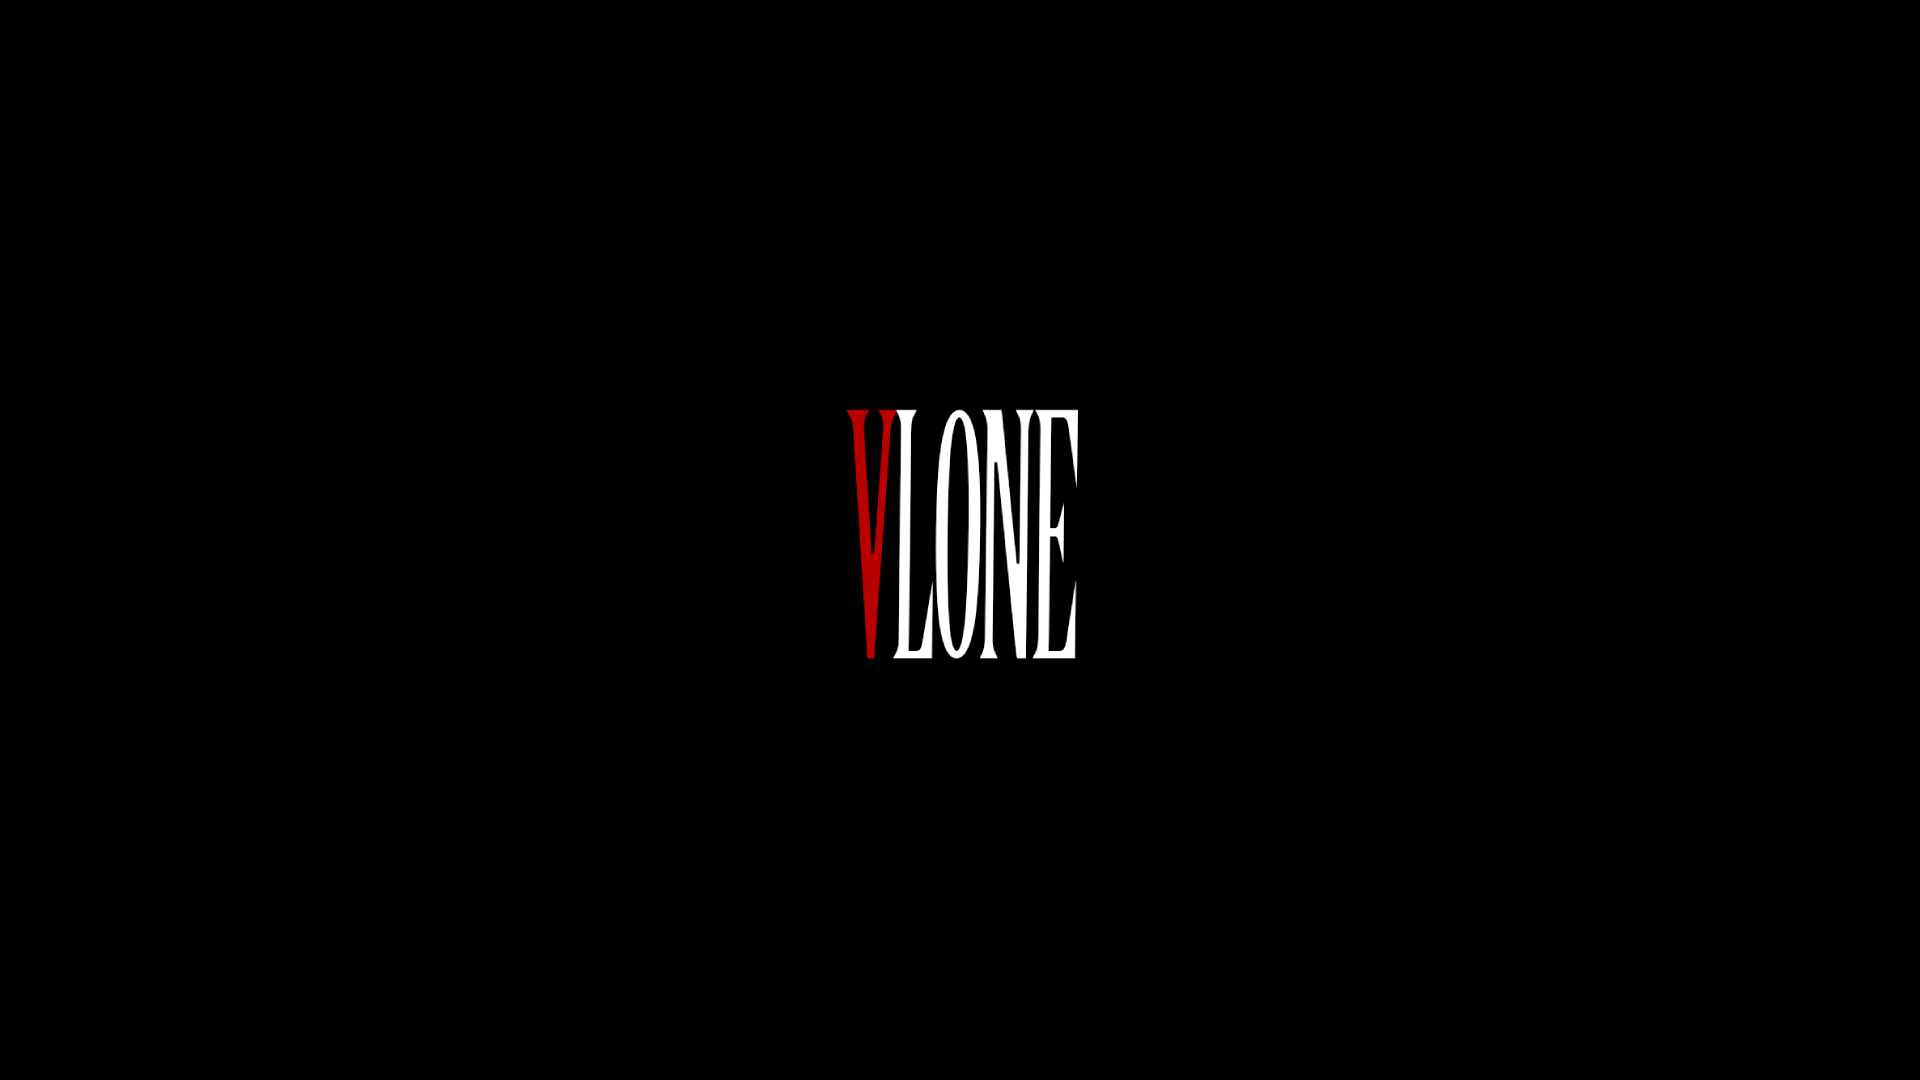 Couldn T Find Vlone Desktop Wallpaper Online So I Made This One